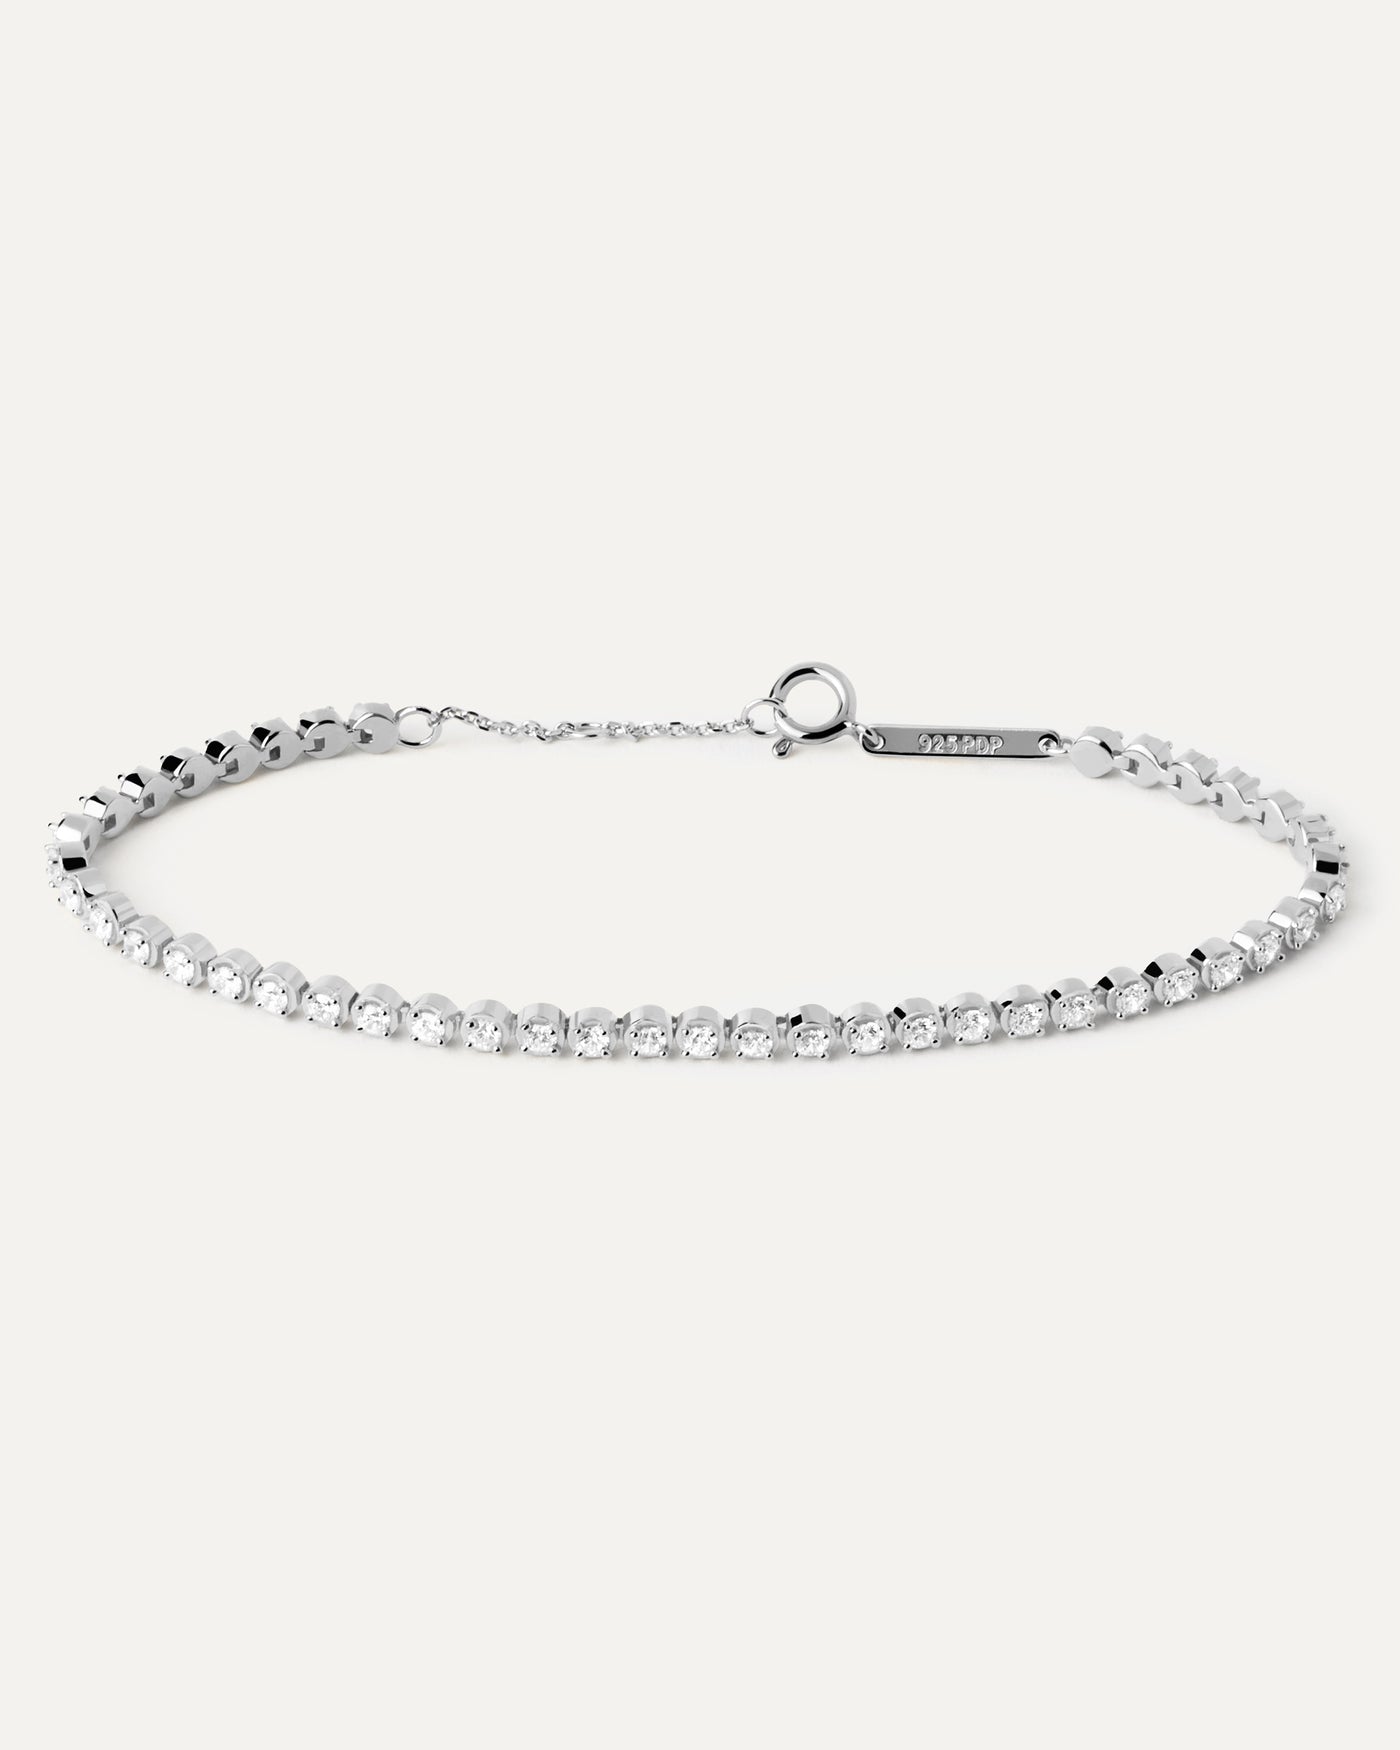 2023 Selection | Florence Silver Bracelet. Sparkling silver tennis bracelet set with round cut white zirconia. Get the latest arrival from PDPAOLA. Place your order safely and get this Best Seller. Free Shipping.